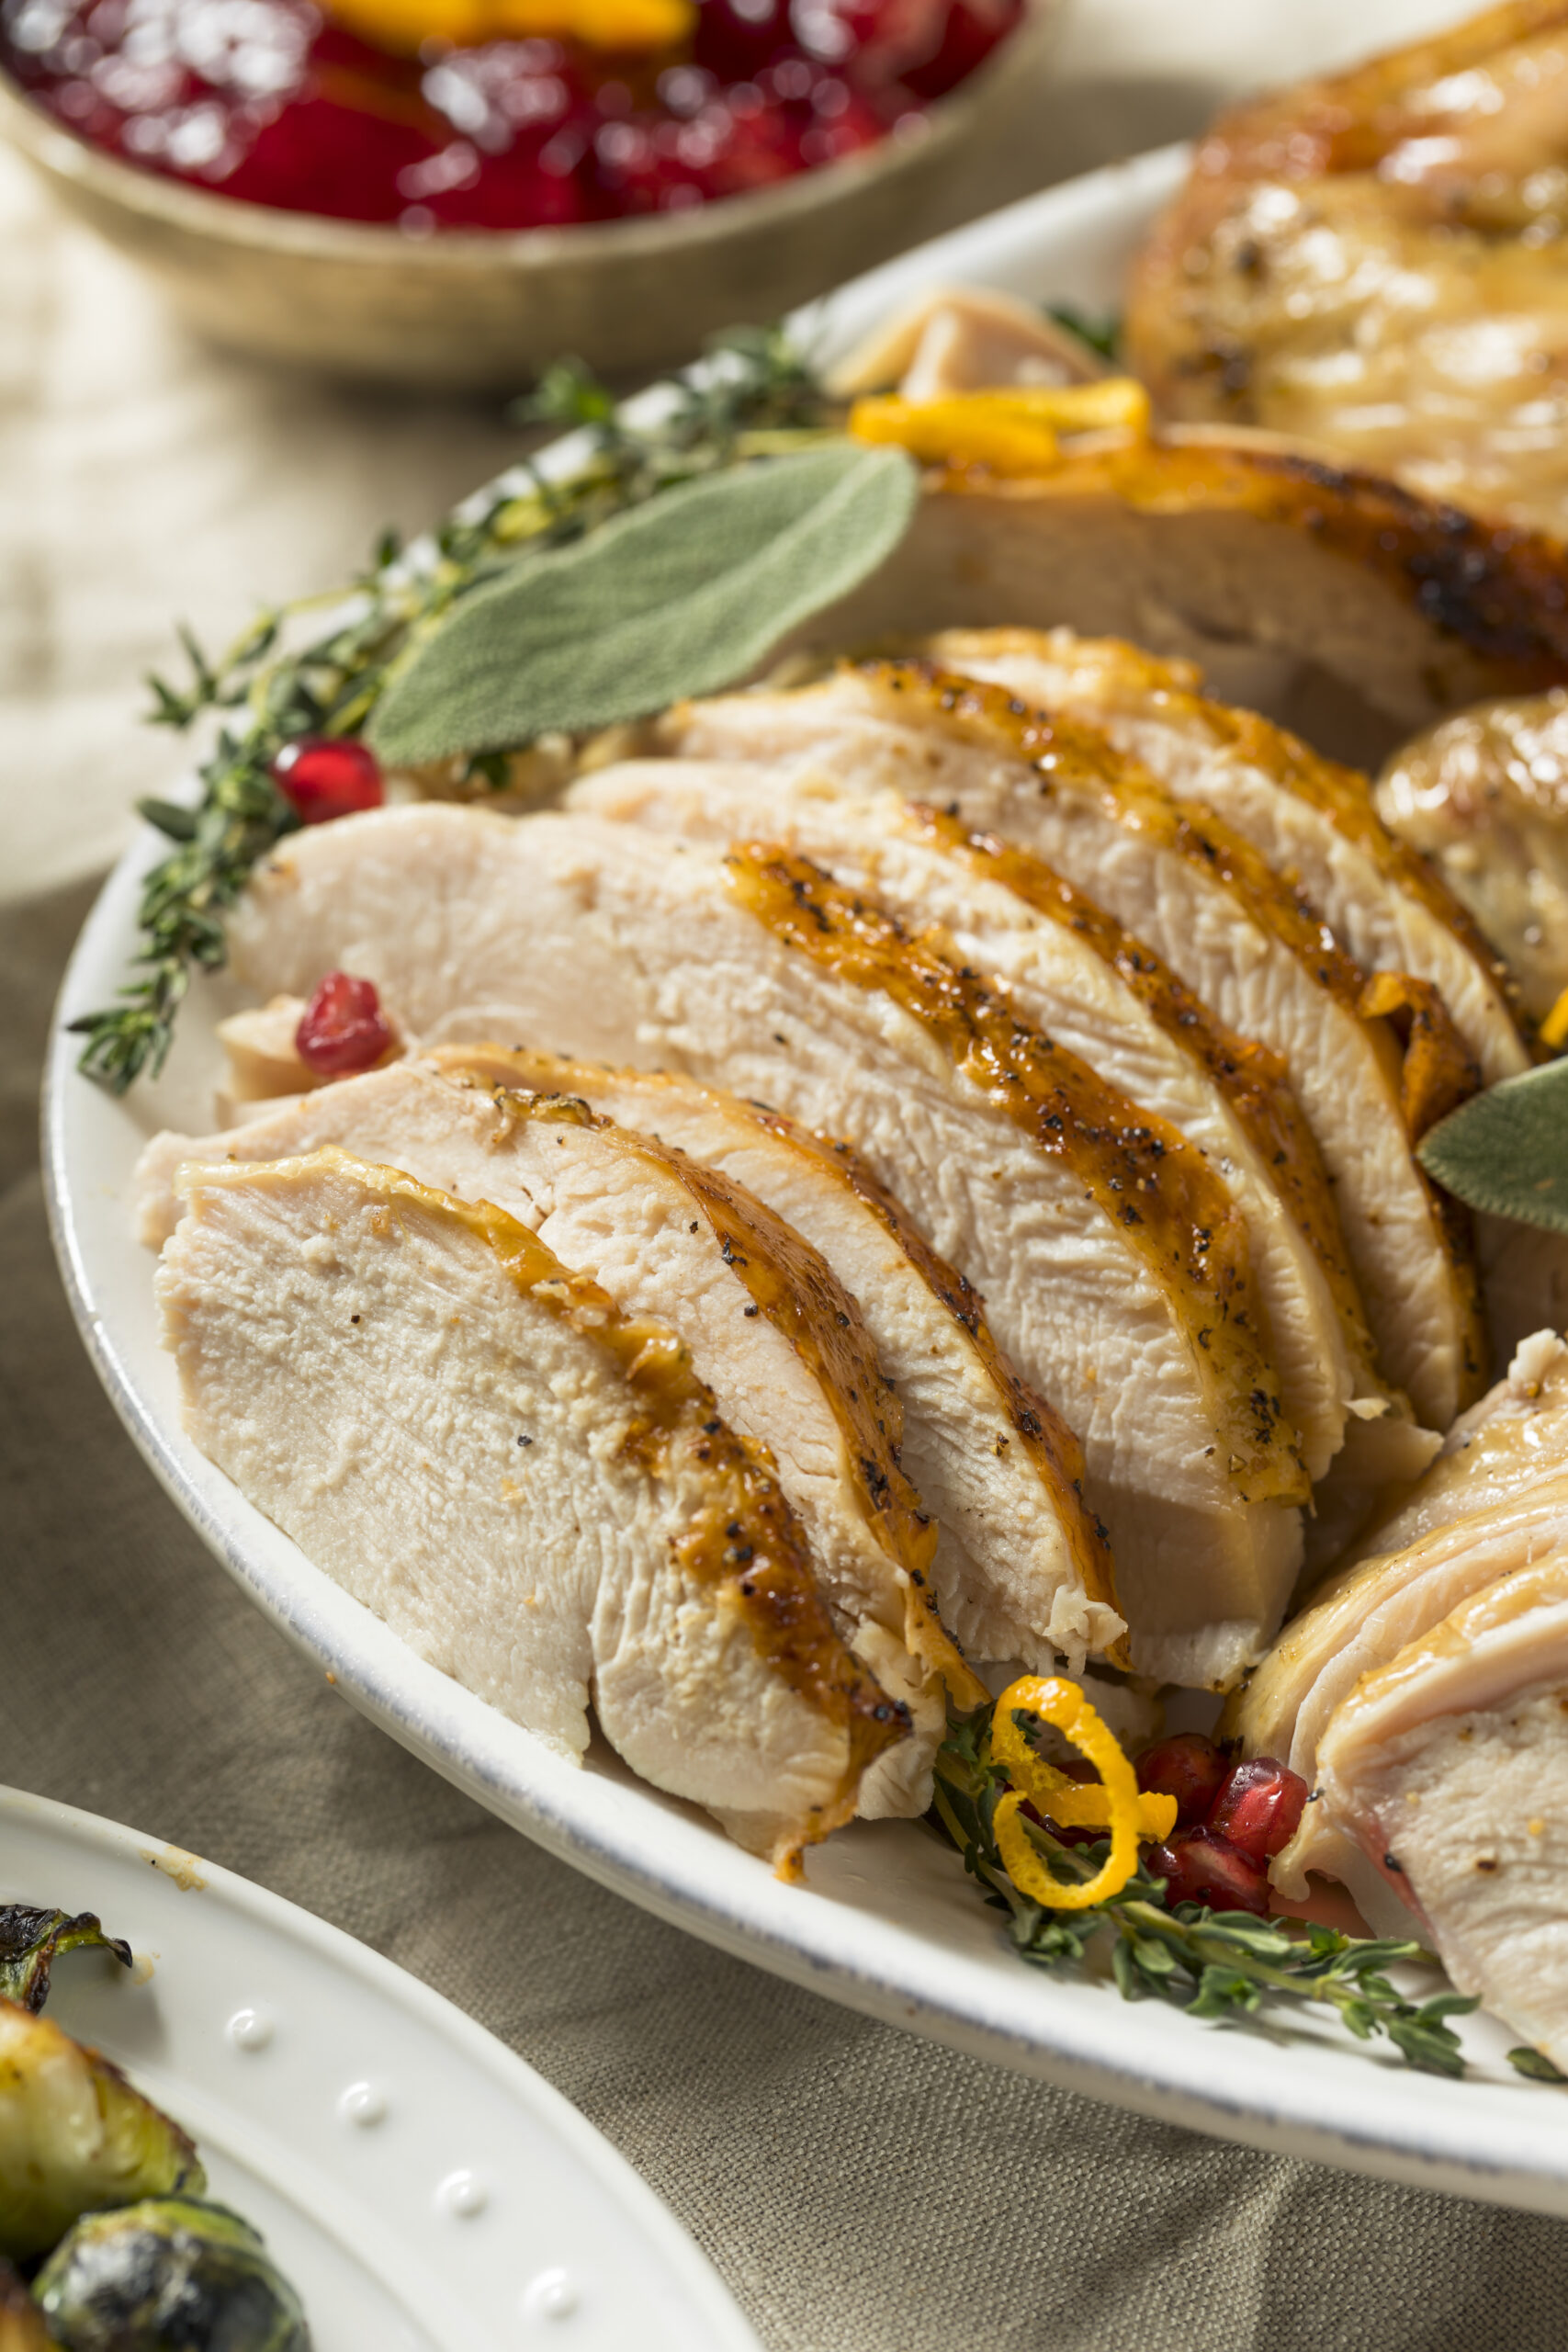 A close look at the crock pot turkey and stuffing.